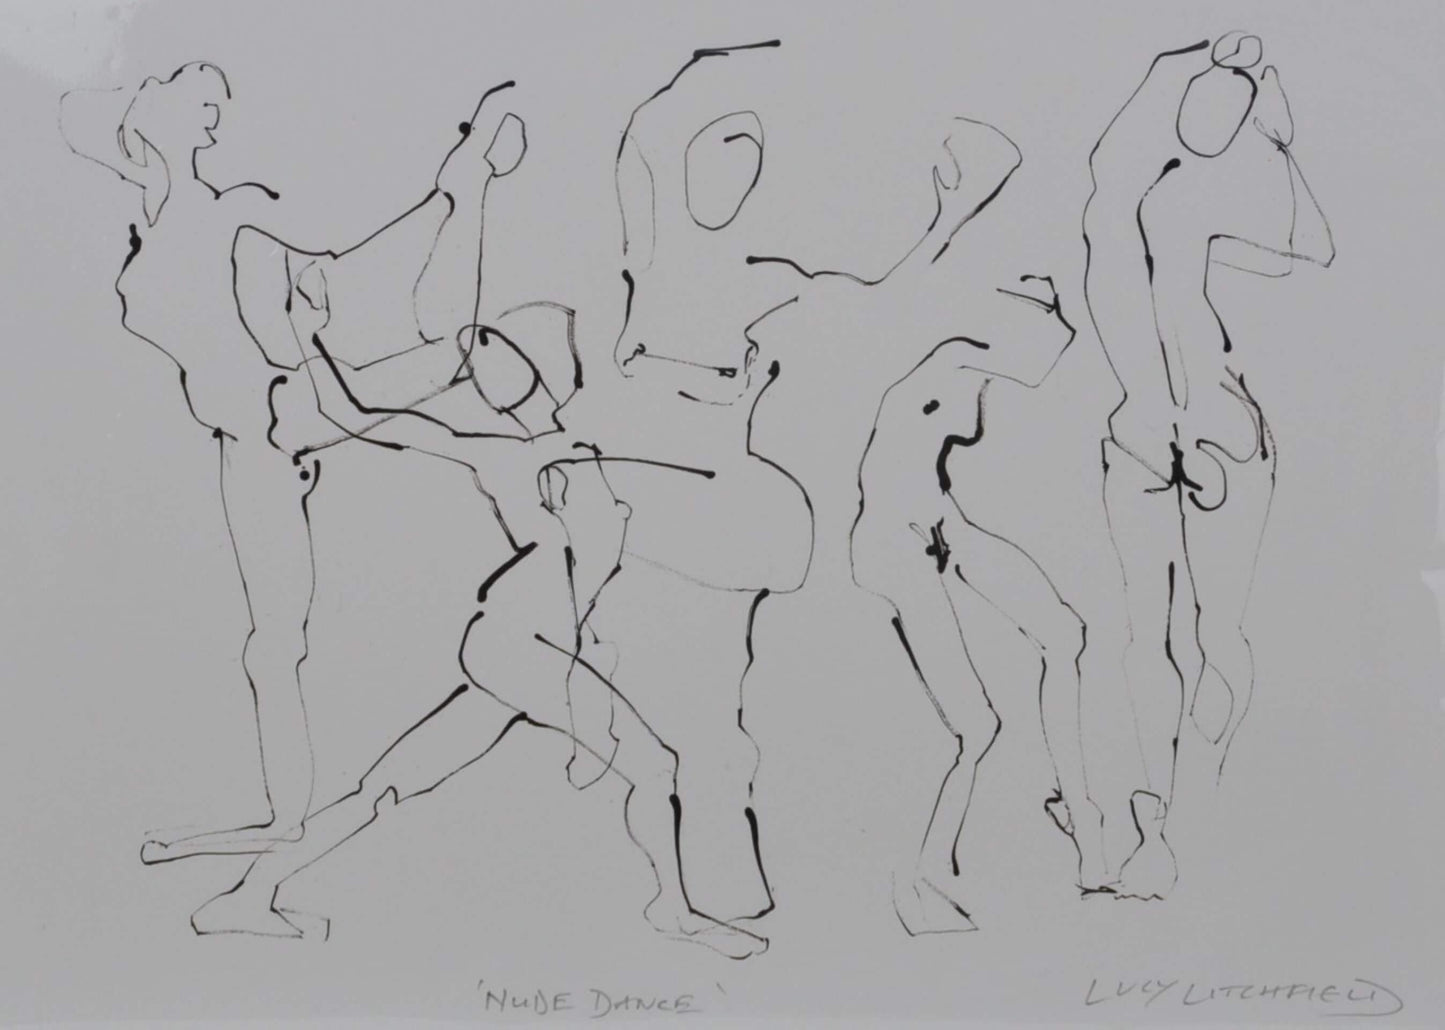 Lucy Litchfield Prints Printed Figures - 'Nude Dance'